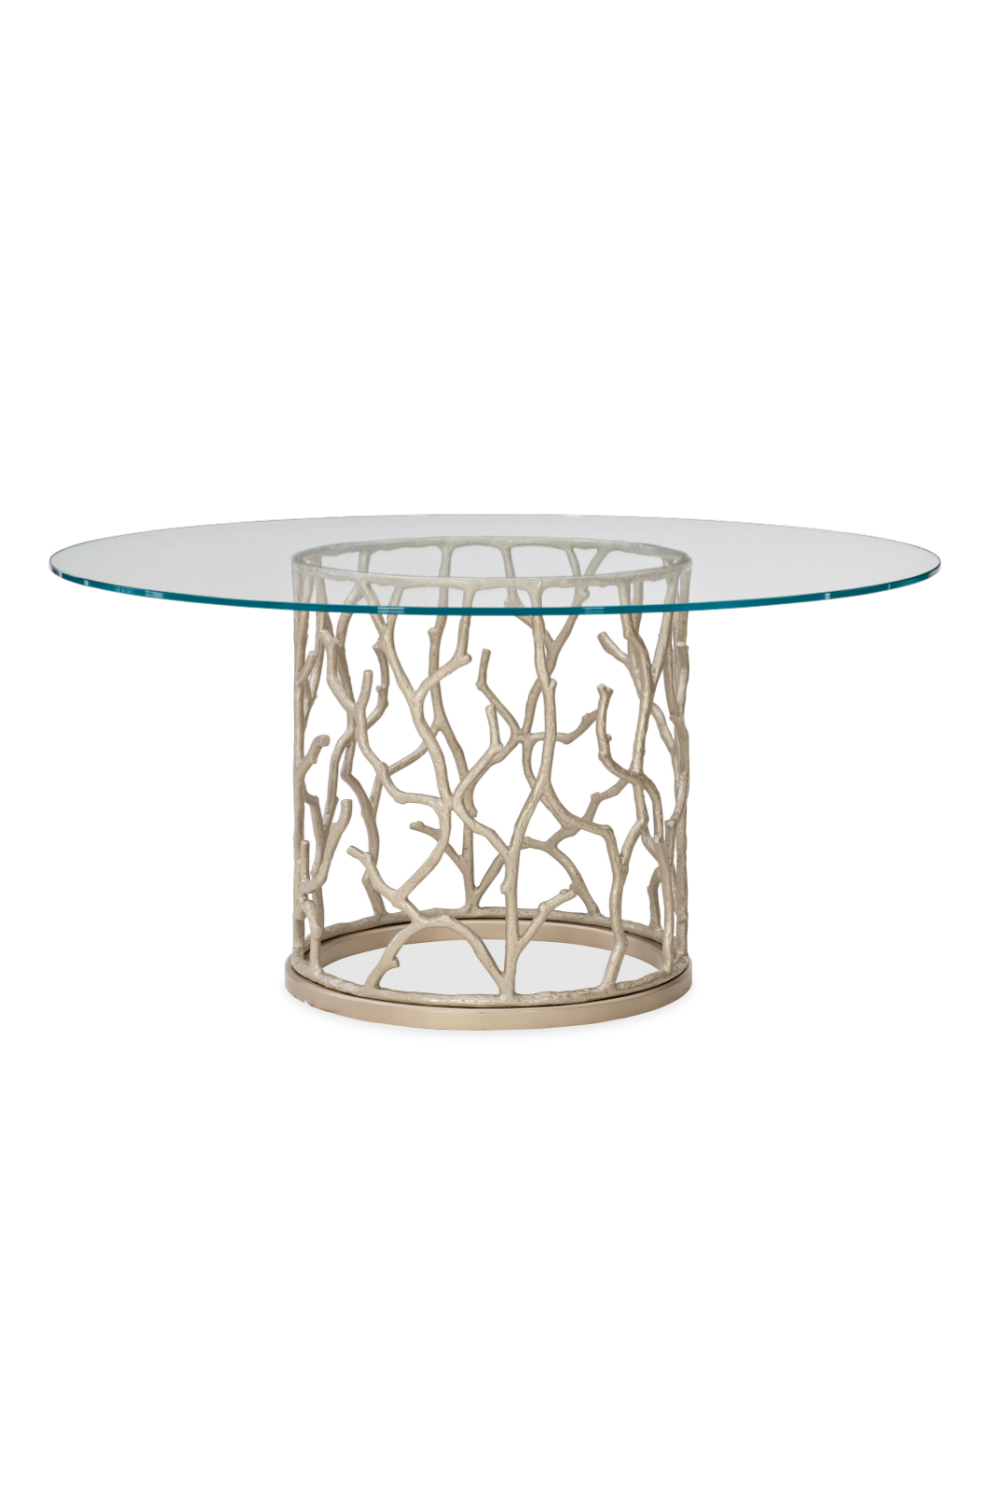 Round Glass Modern Dining Table | Caracole Around The Reef | Oroa.com